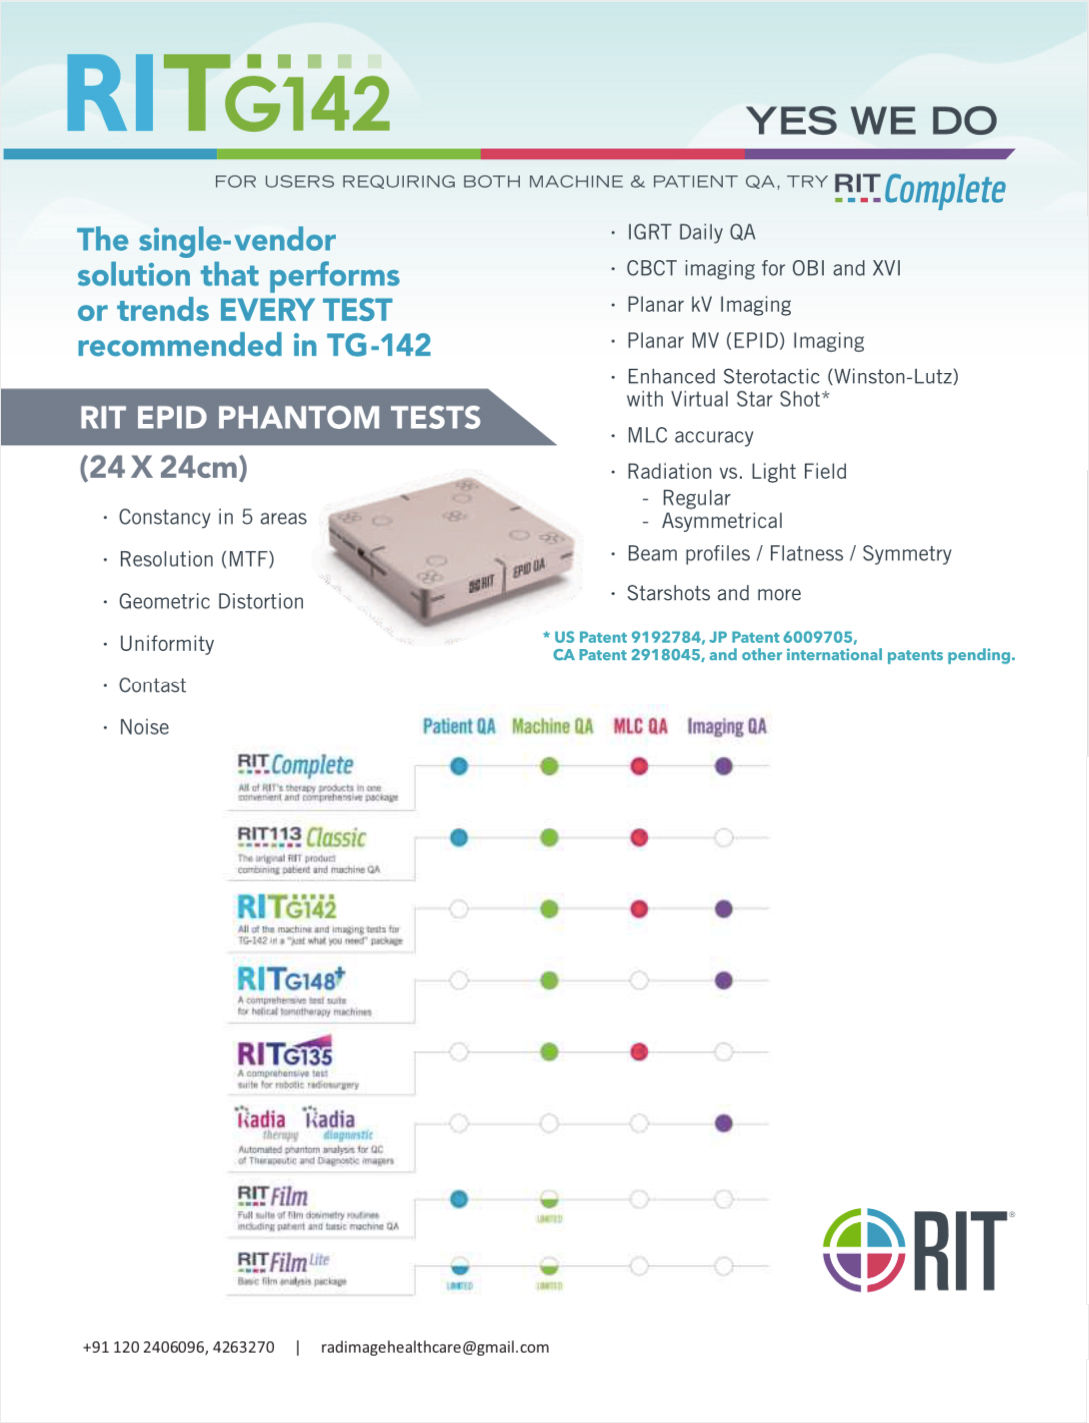 RIT in India single vendor solution performs trends EVERY TEST recommended in TG-142